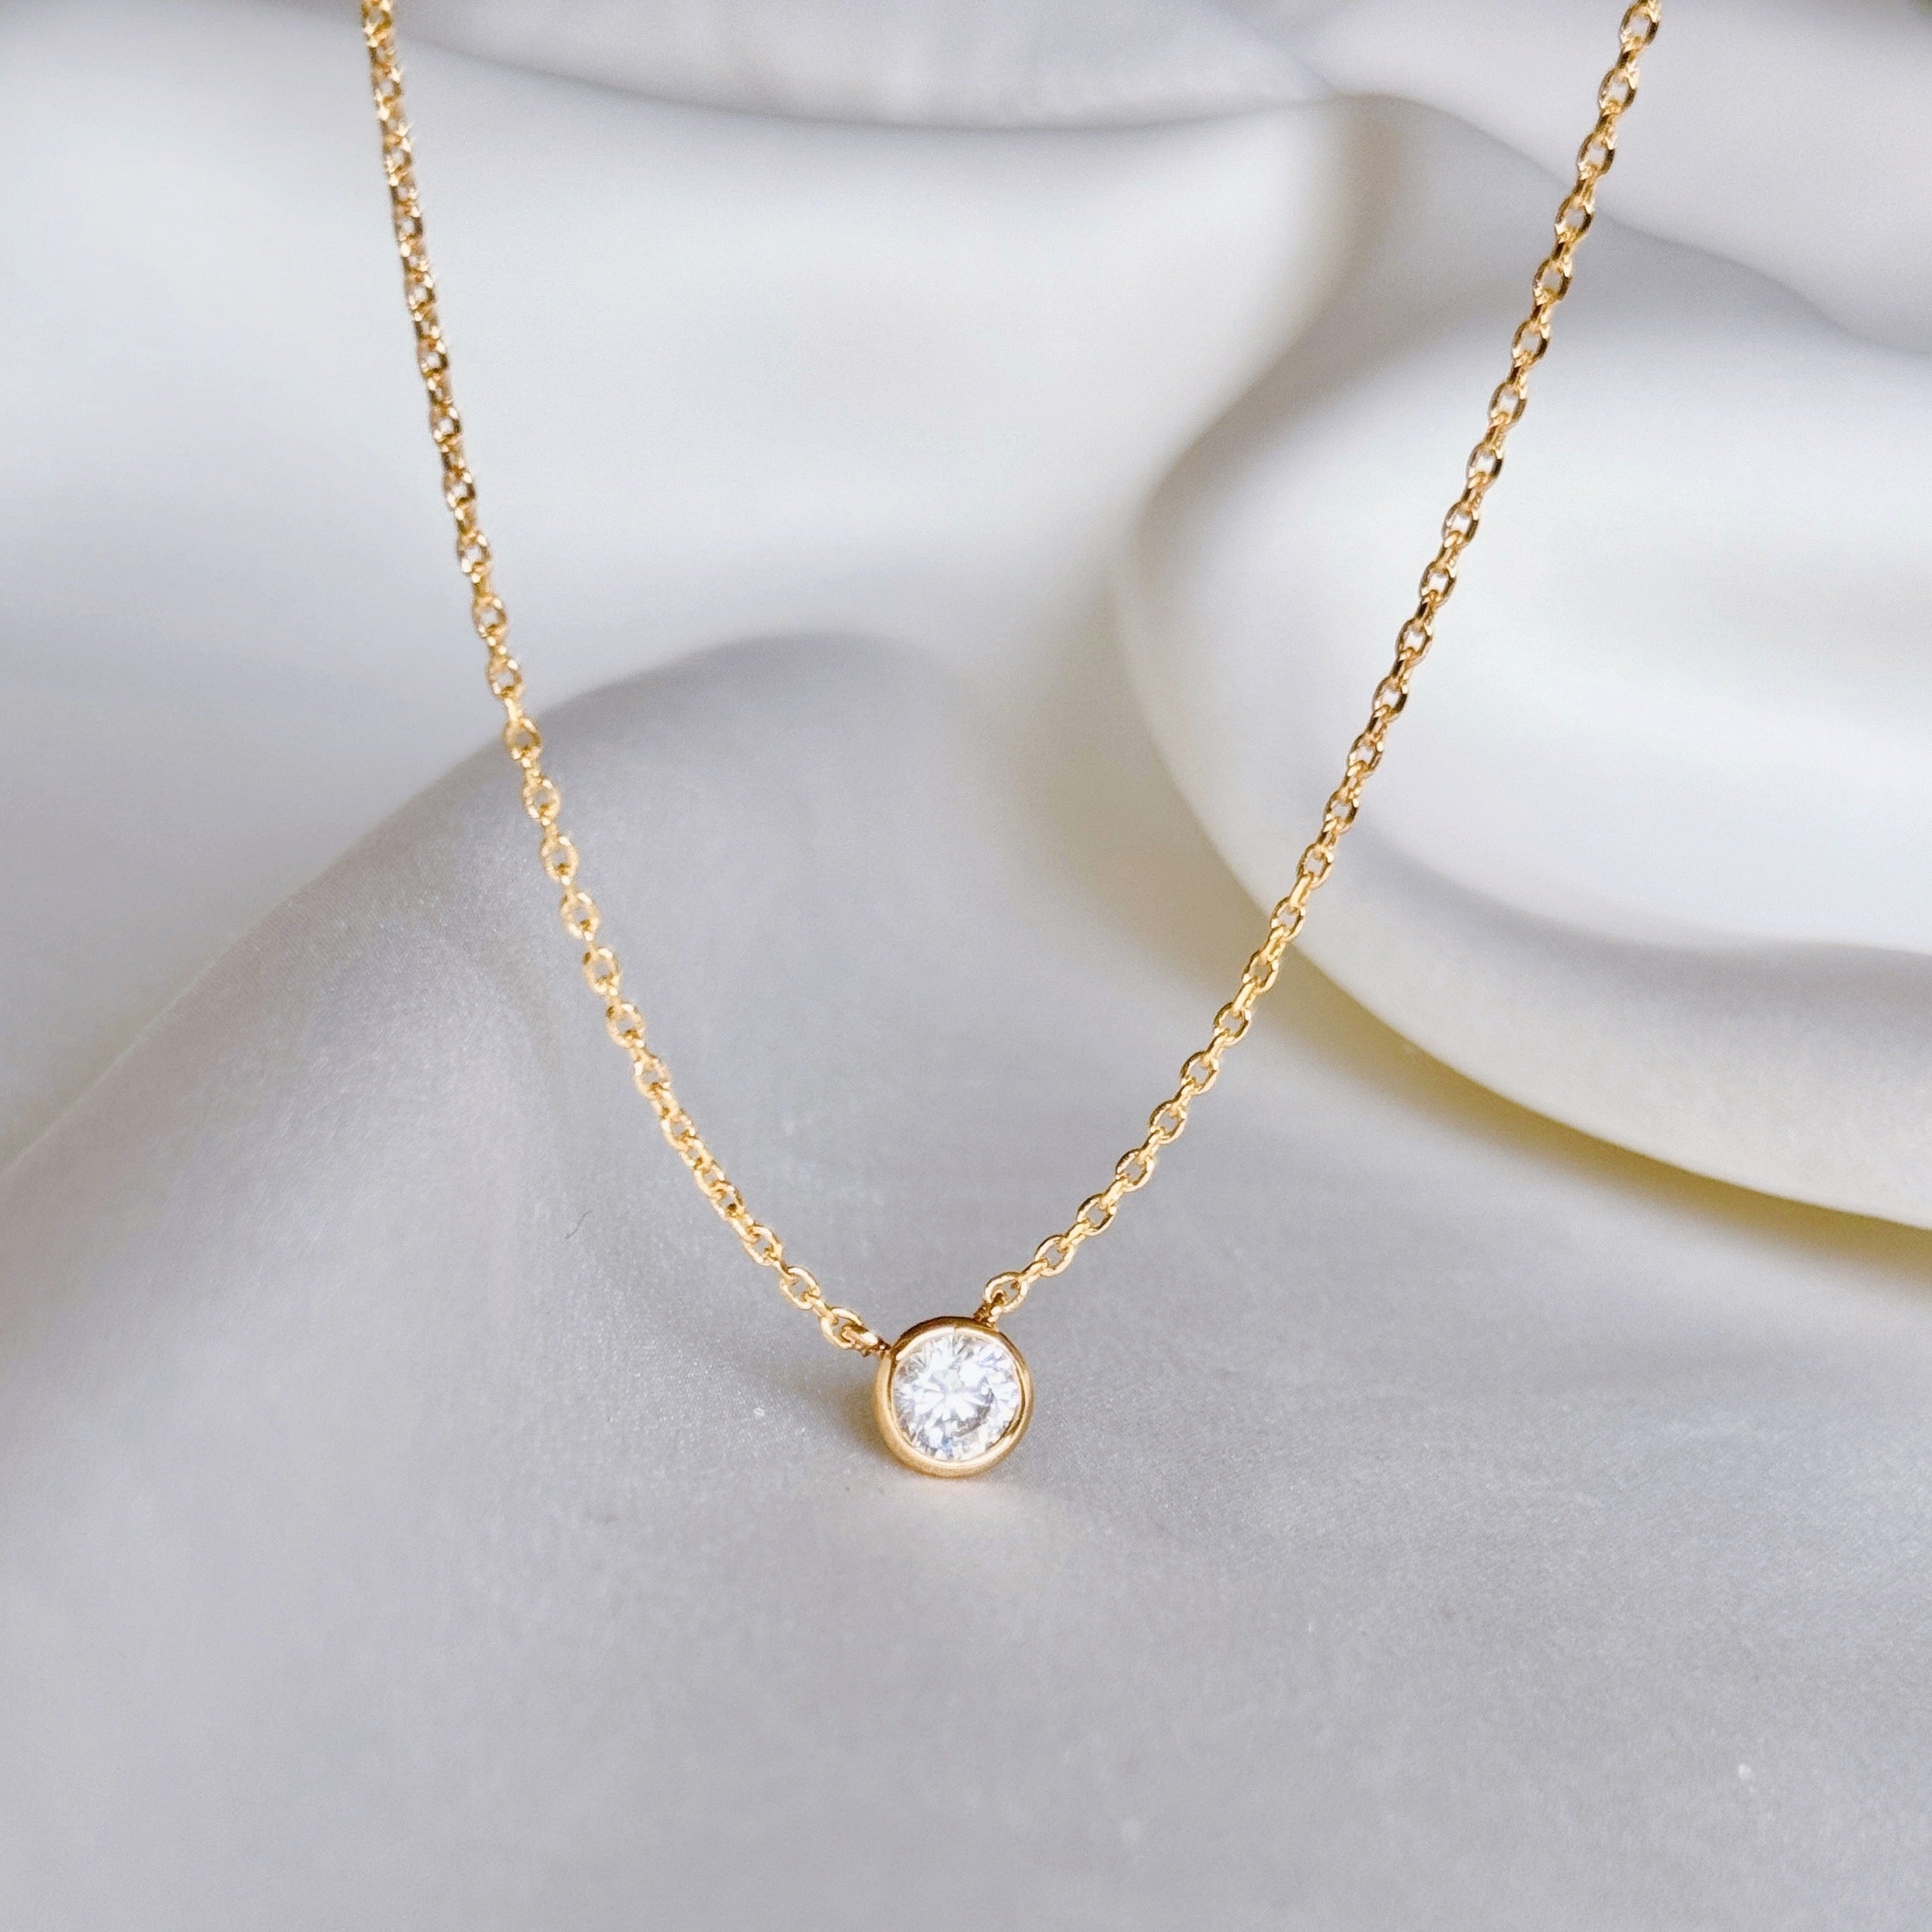 Gold-plated “Closed-set Solitaire” necklace